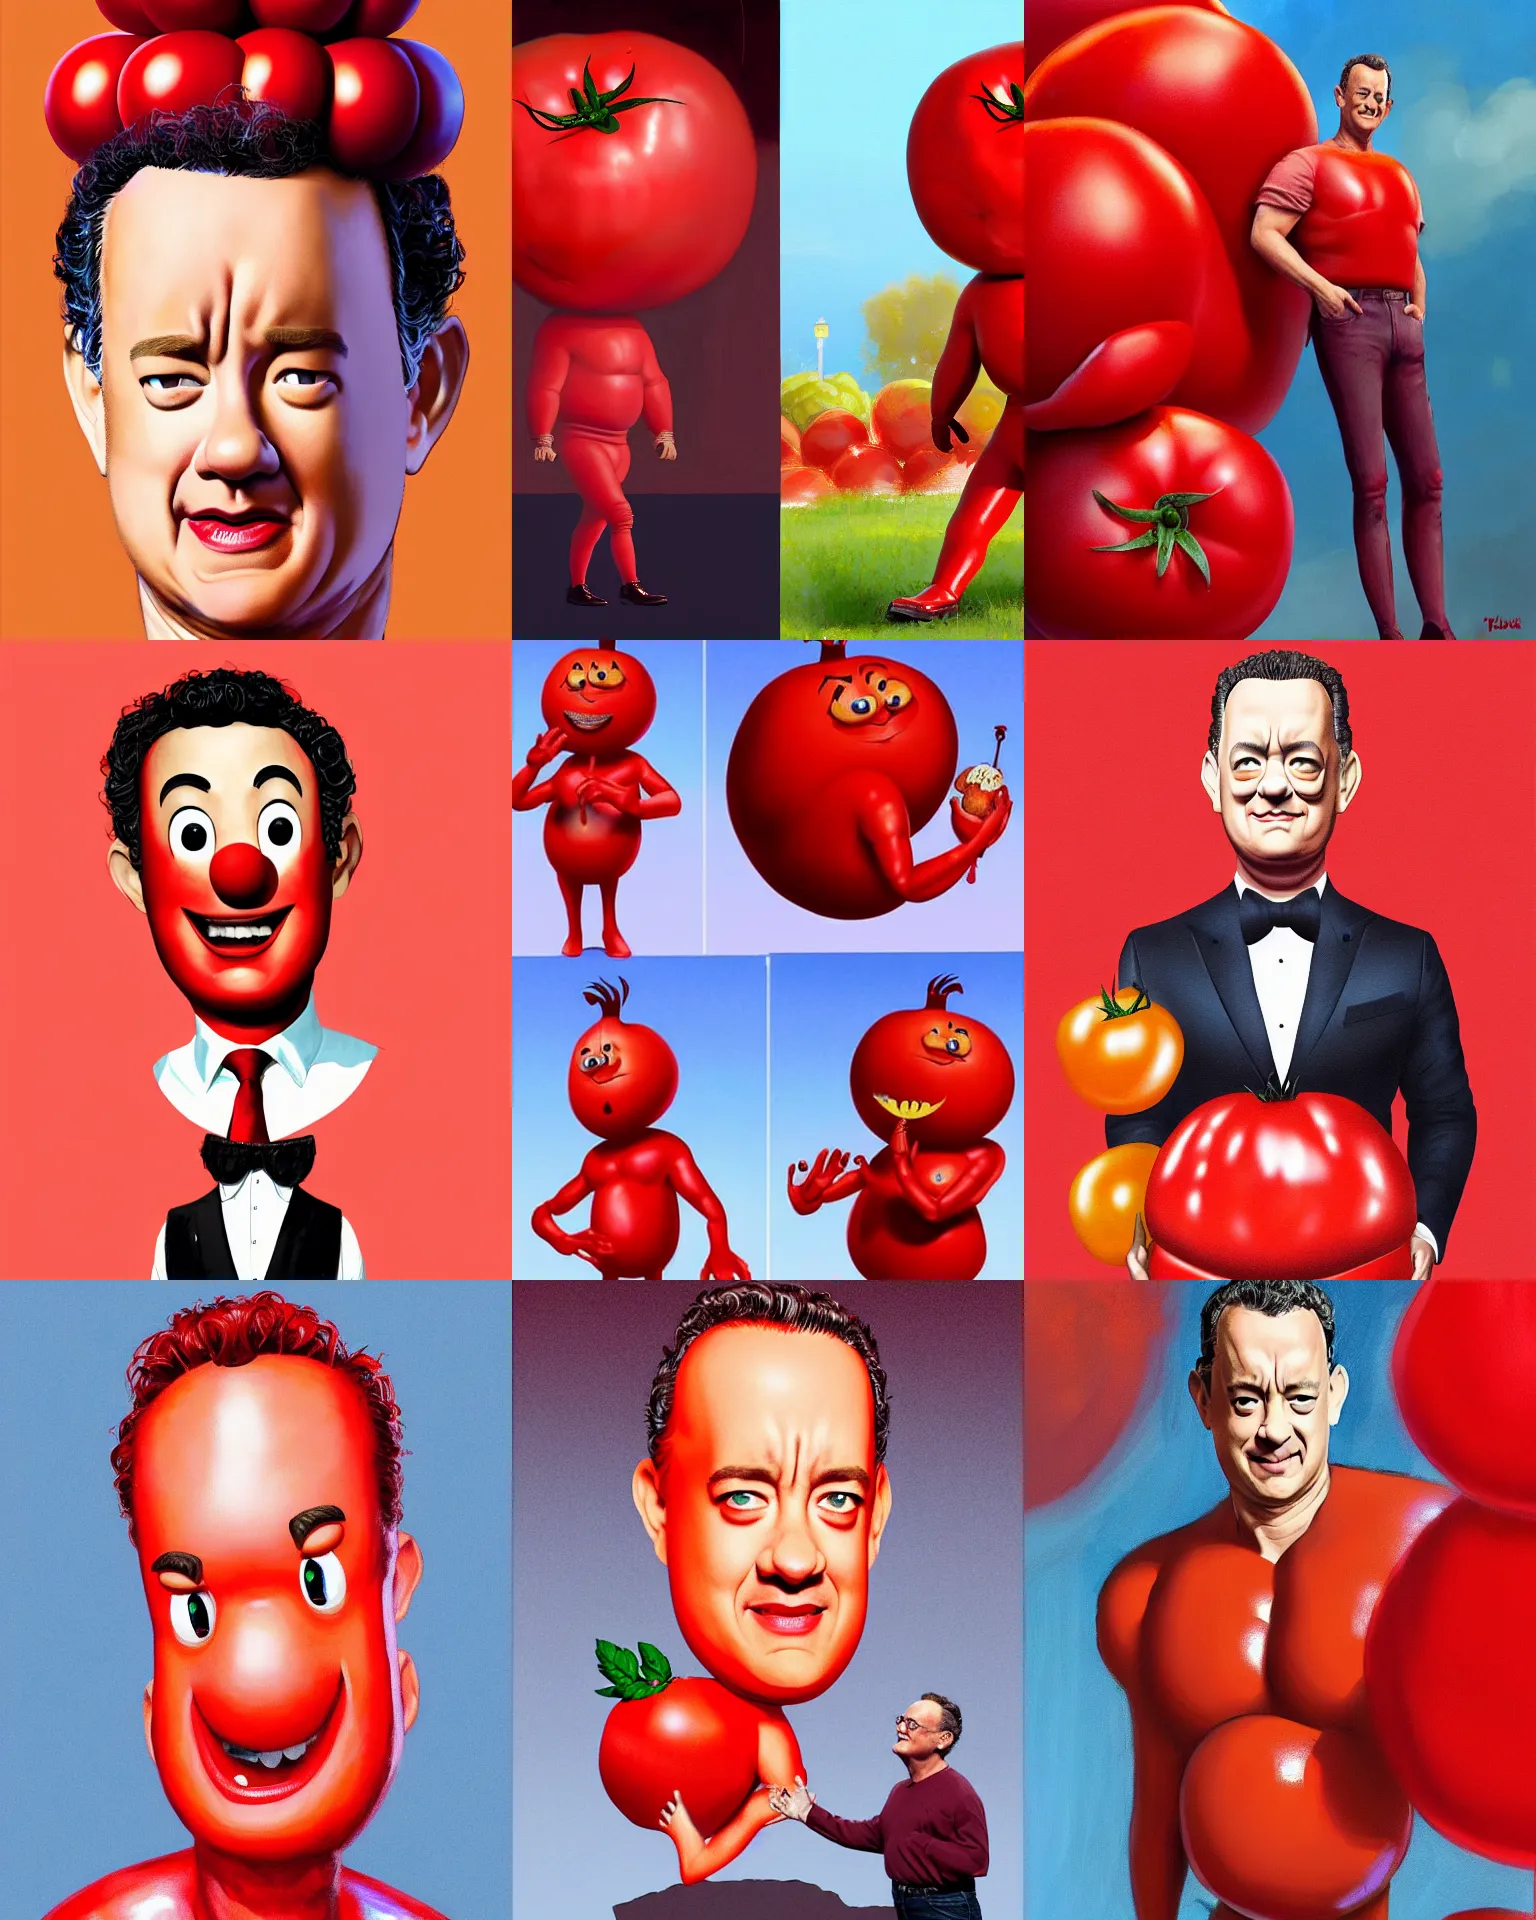 Prompt: tom hanks as tomato hanks mascot, his skin is red and he resembles a giant tomato, dramatic lighting, london fashion week, bedazzled fruit costumes, shaded lighting poster by magali villeneuve, artgerm, jeremy lipkin and michael garmash, rob rey and kentaro miura style, trending on art station